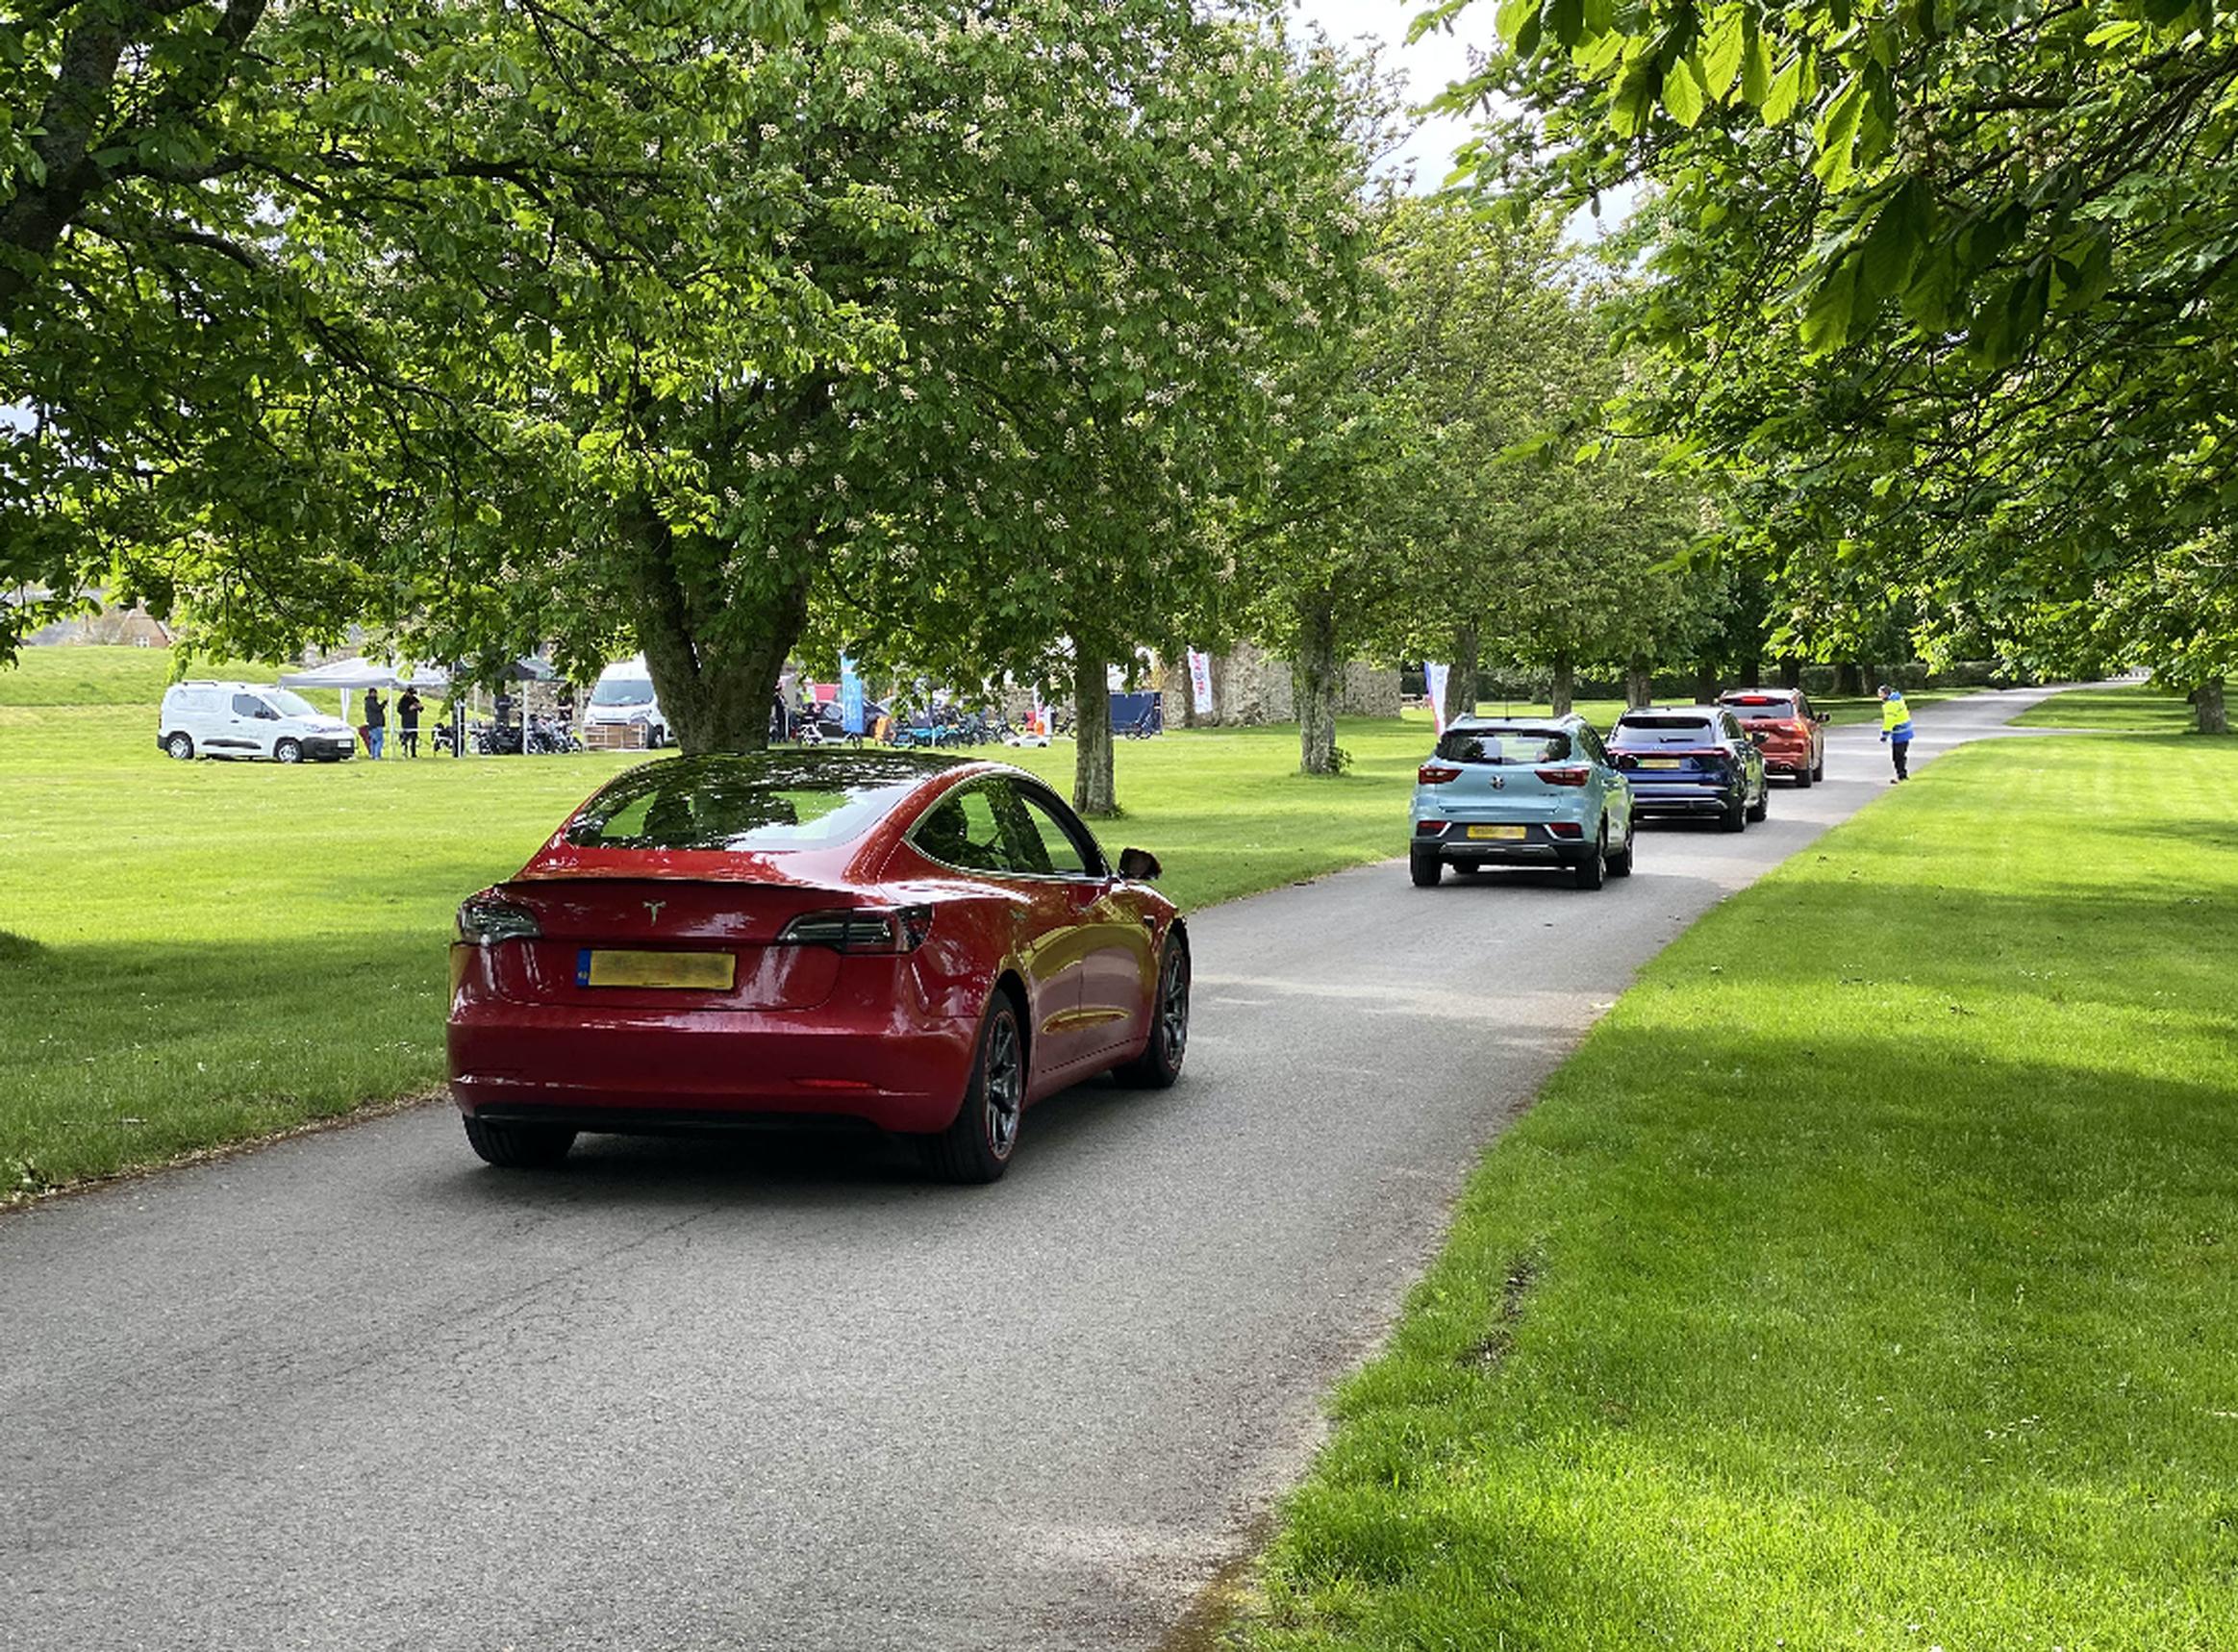 Simply Electric takes place in the grounds of Beaulieu